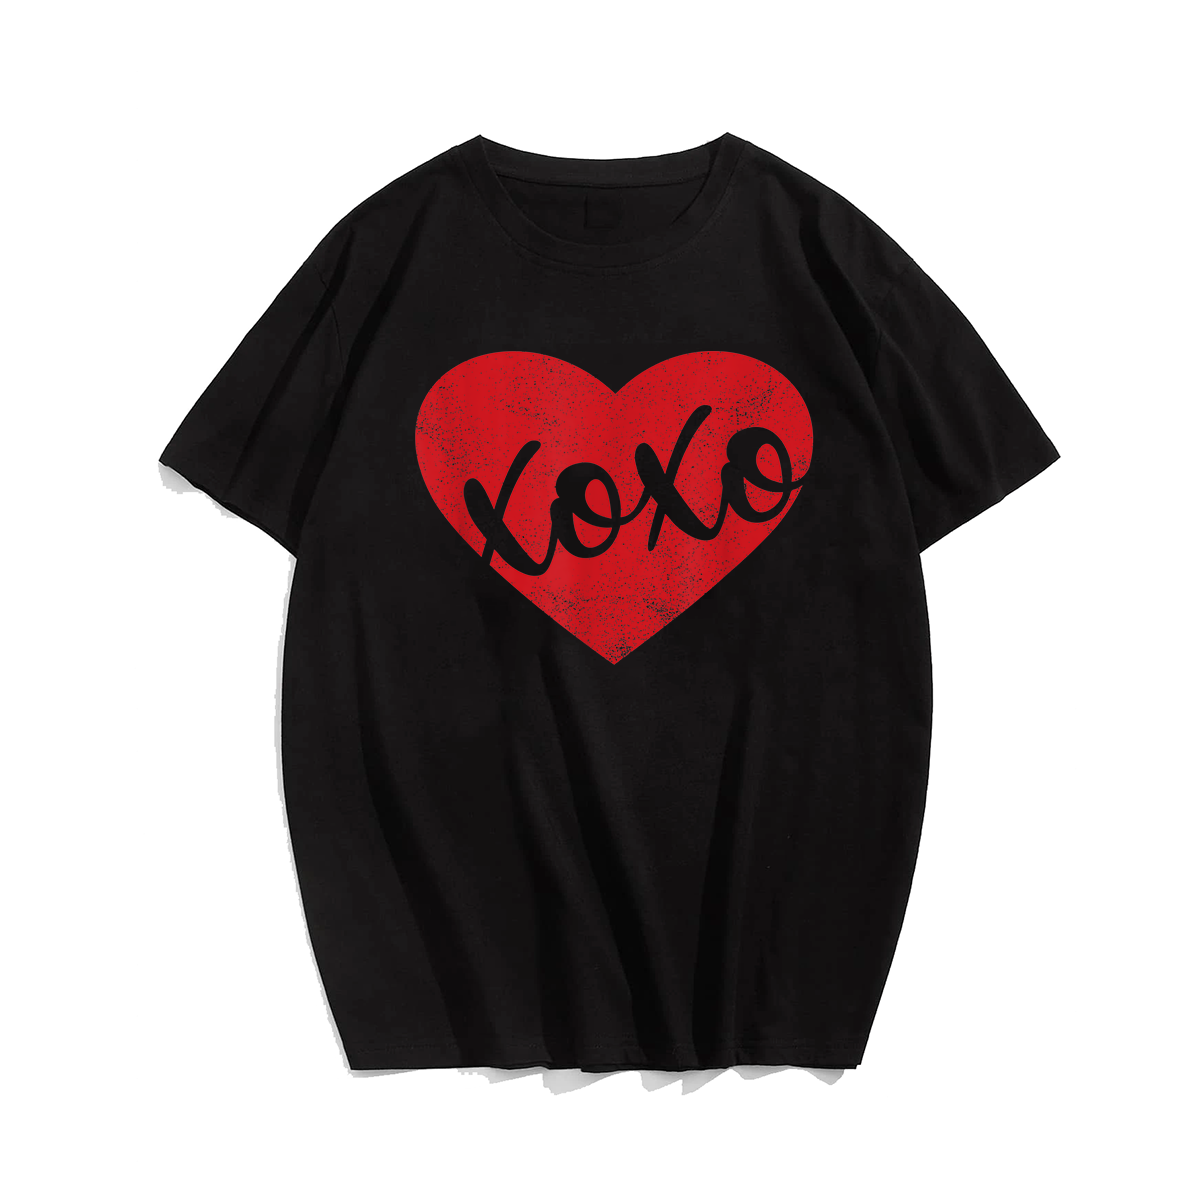 XOXO Love Valentines Day Heart T-Shirt, Men Plus Size Oversize T-shirt for Big & Tall Man